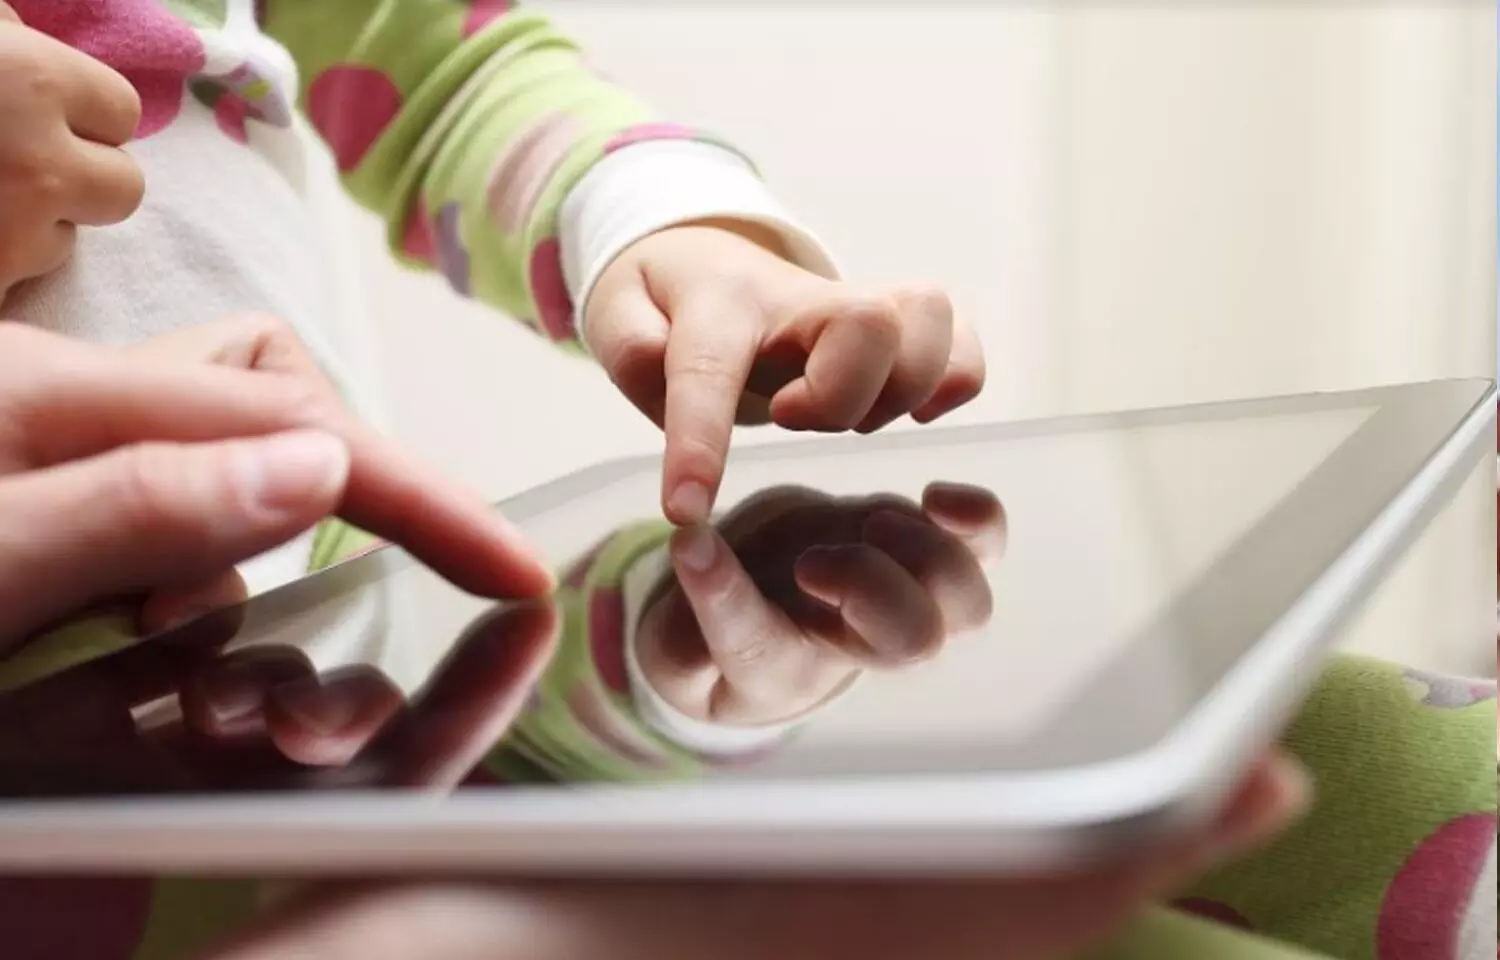 Toddlers who use touchscreens may be more distractible